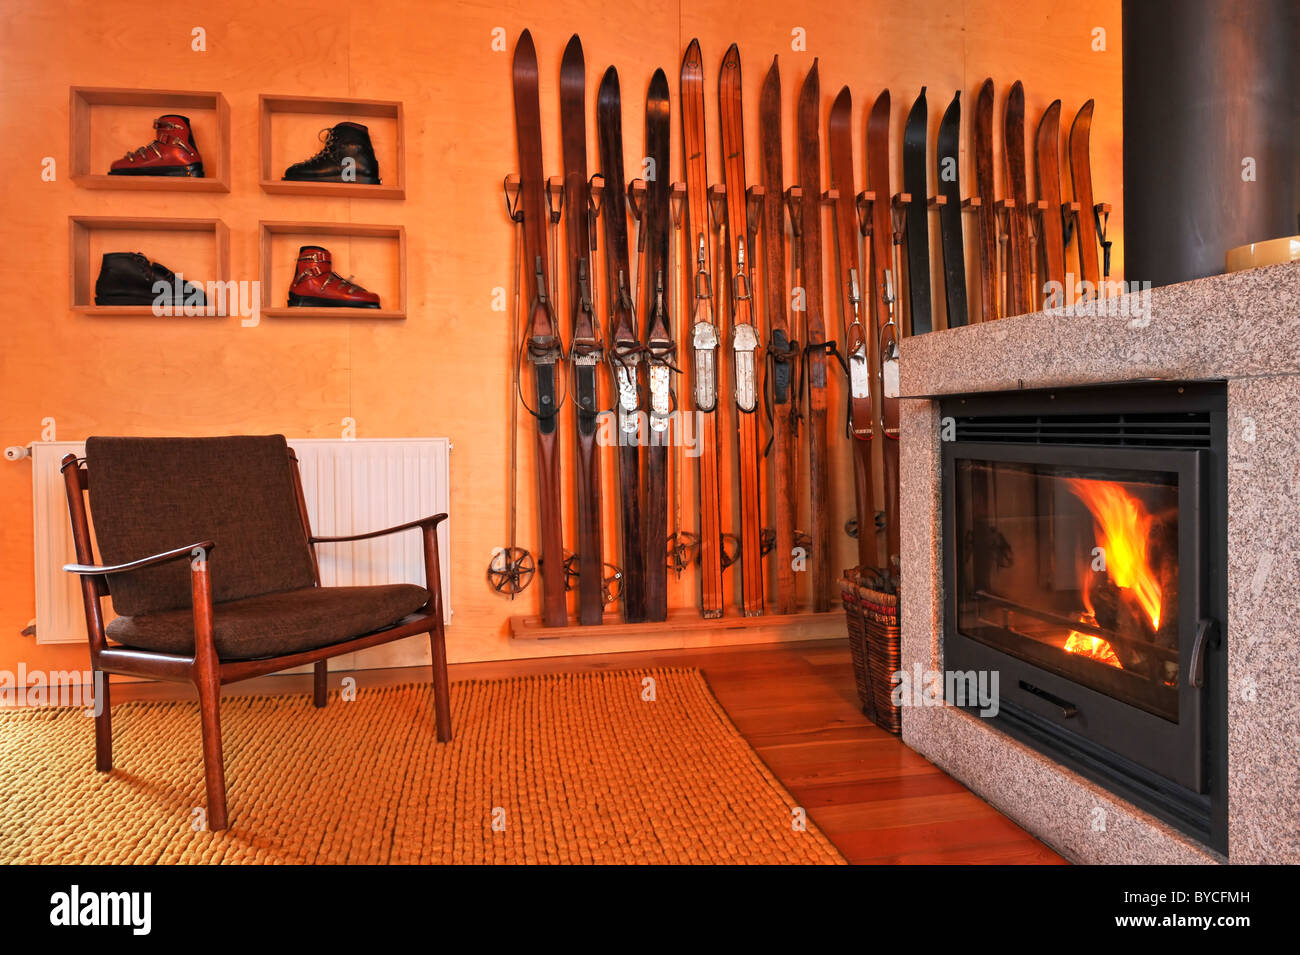 Chalet living room with inviting fireplace vintage ski rack and ski boots and scandinavian furniture Stock Photo